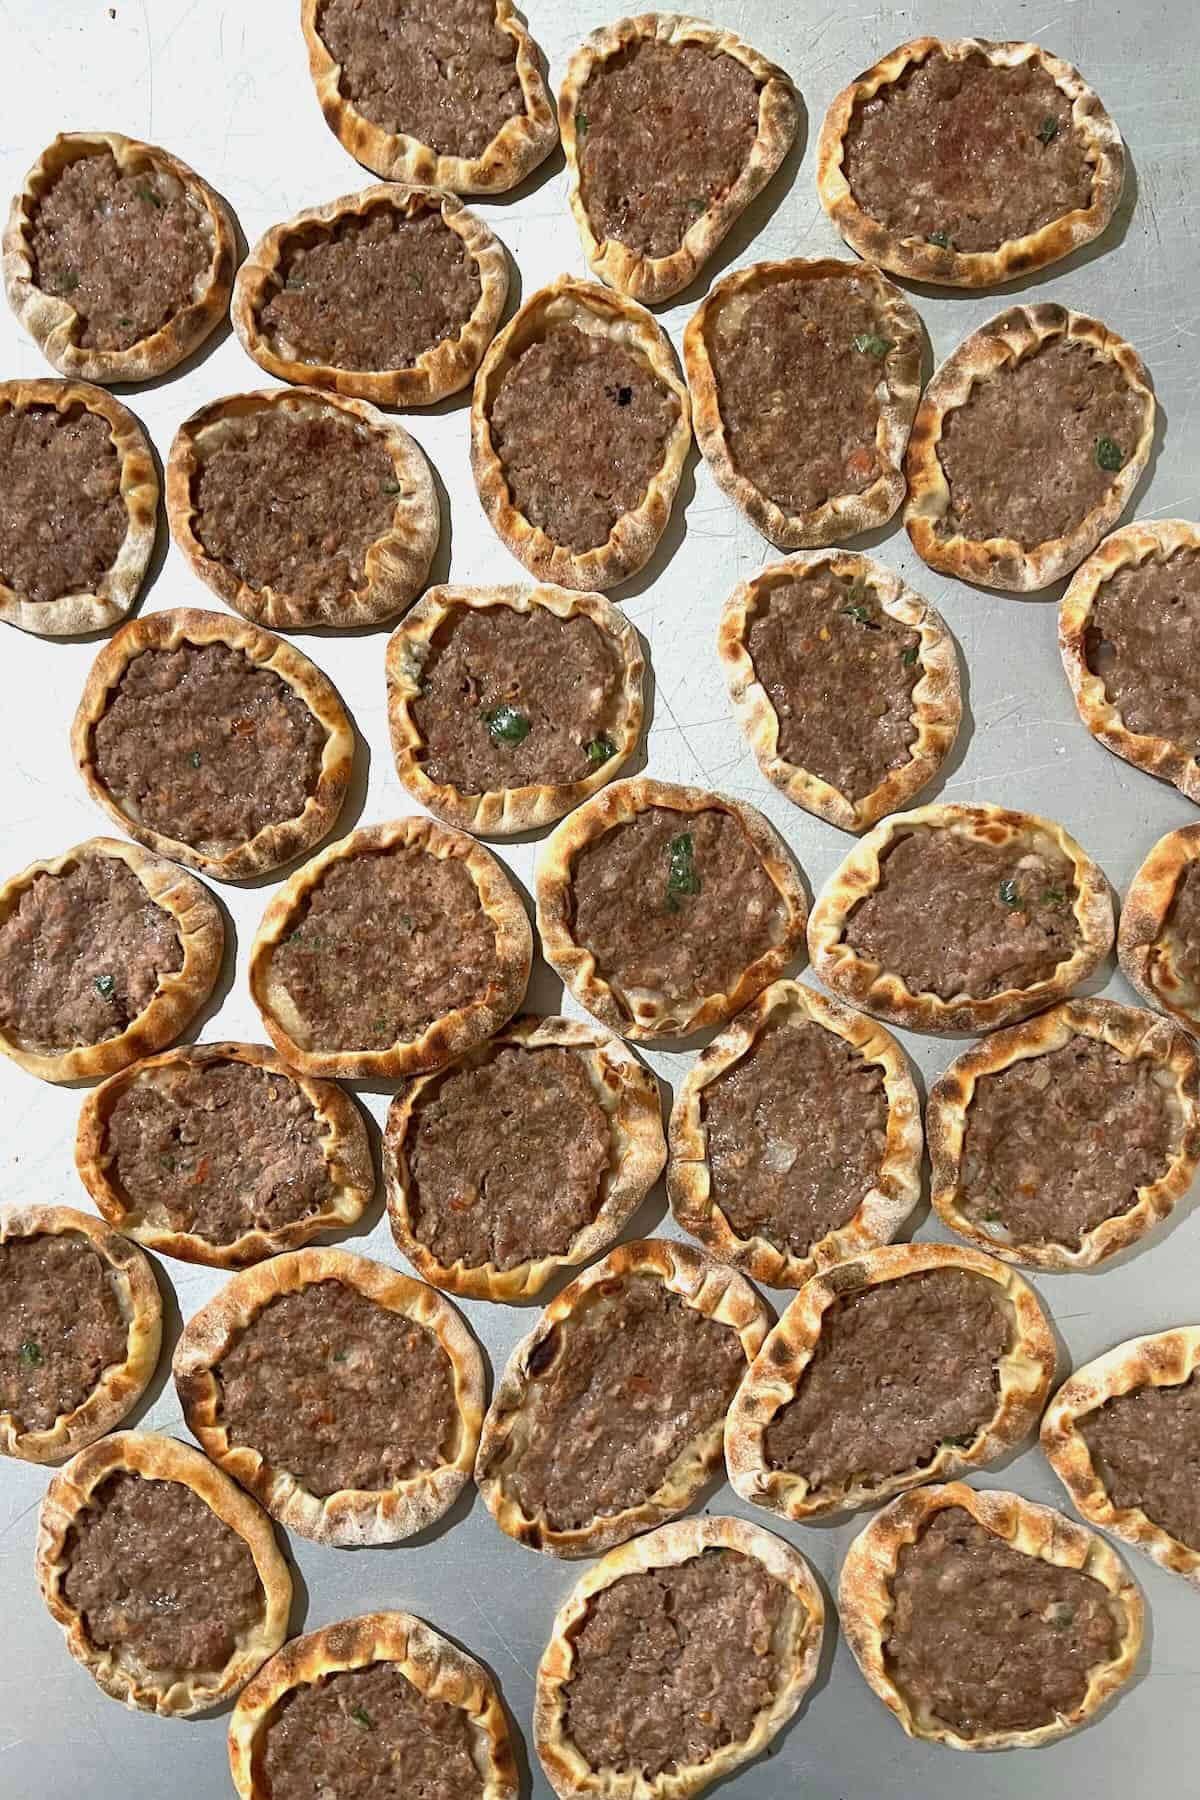 Sfiha meat pies on a flat surface